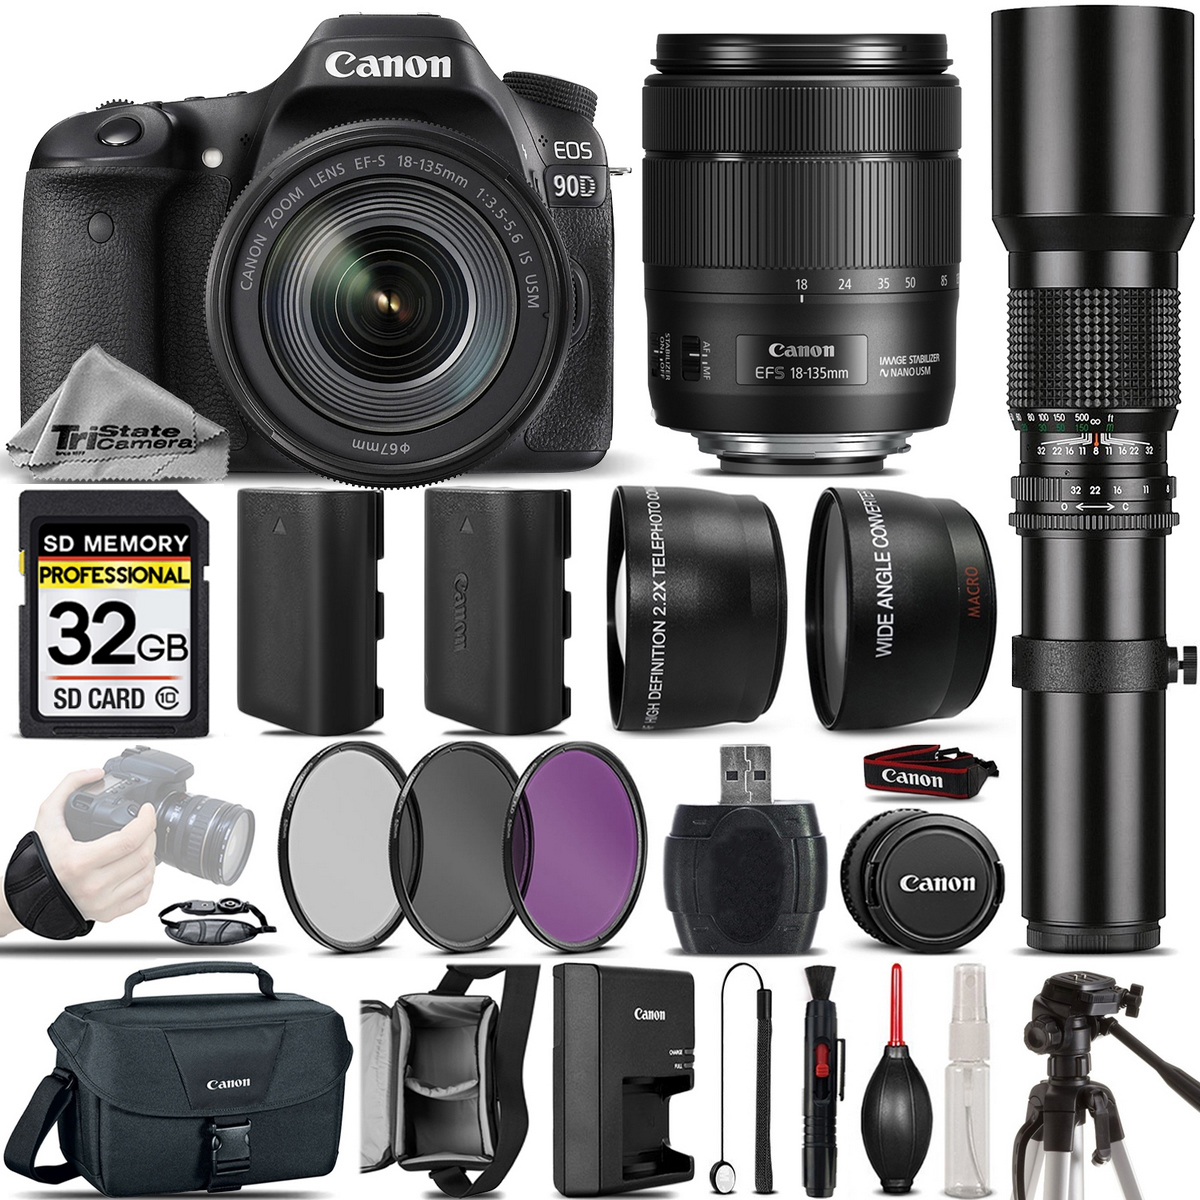 Canon EOS 90D DSLR Camera + Canon 18-135mm IS USM Lens + 500mm preset Zoom Lens+ 2.2x Telephoto Lens + 0.43X Wide Angle Lens + Backup Battery + UV-CPL-FLD Filter - image 1 of 6